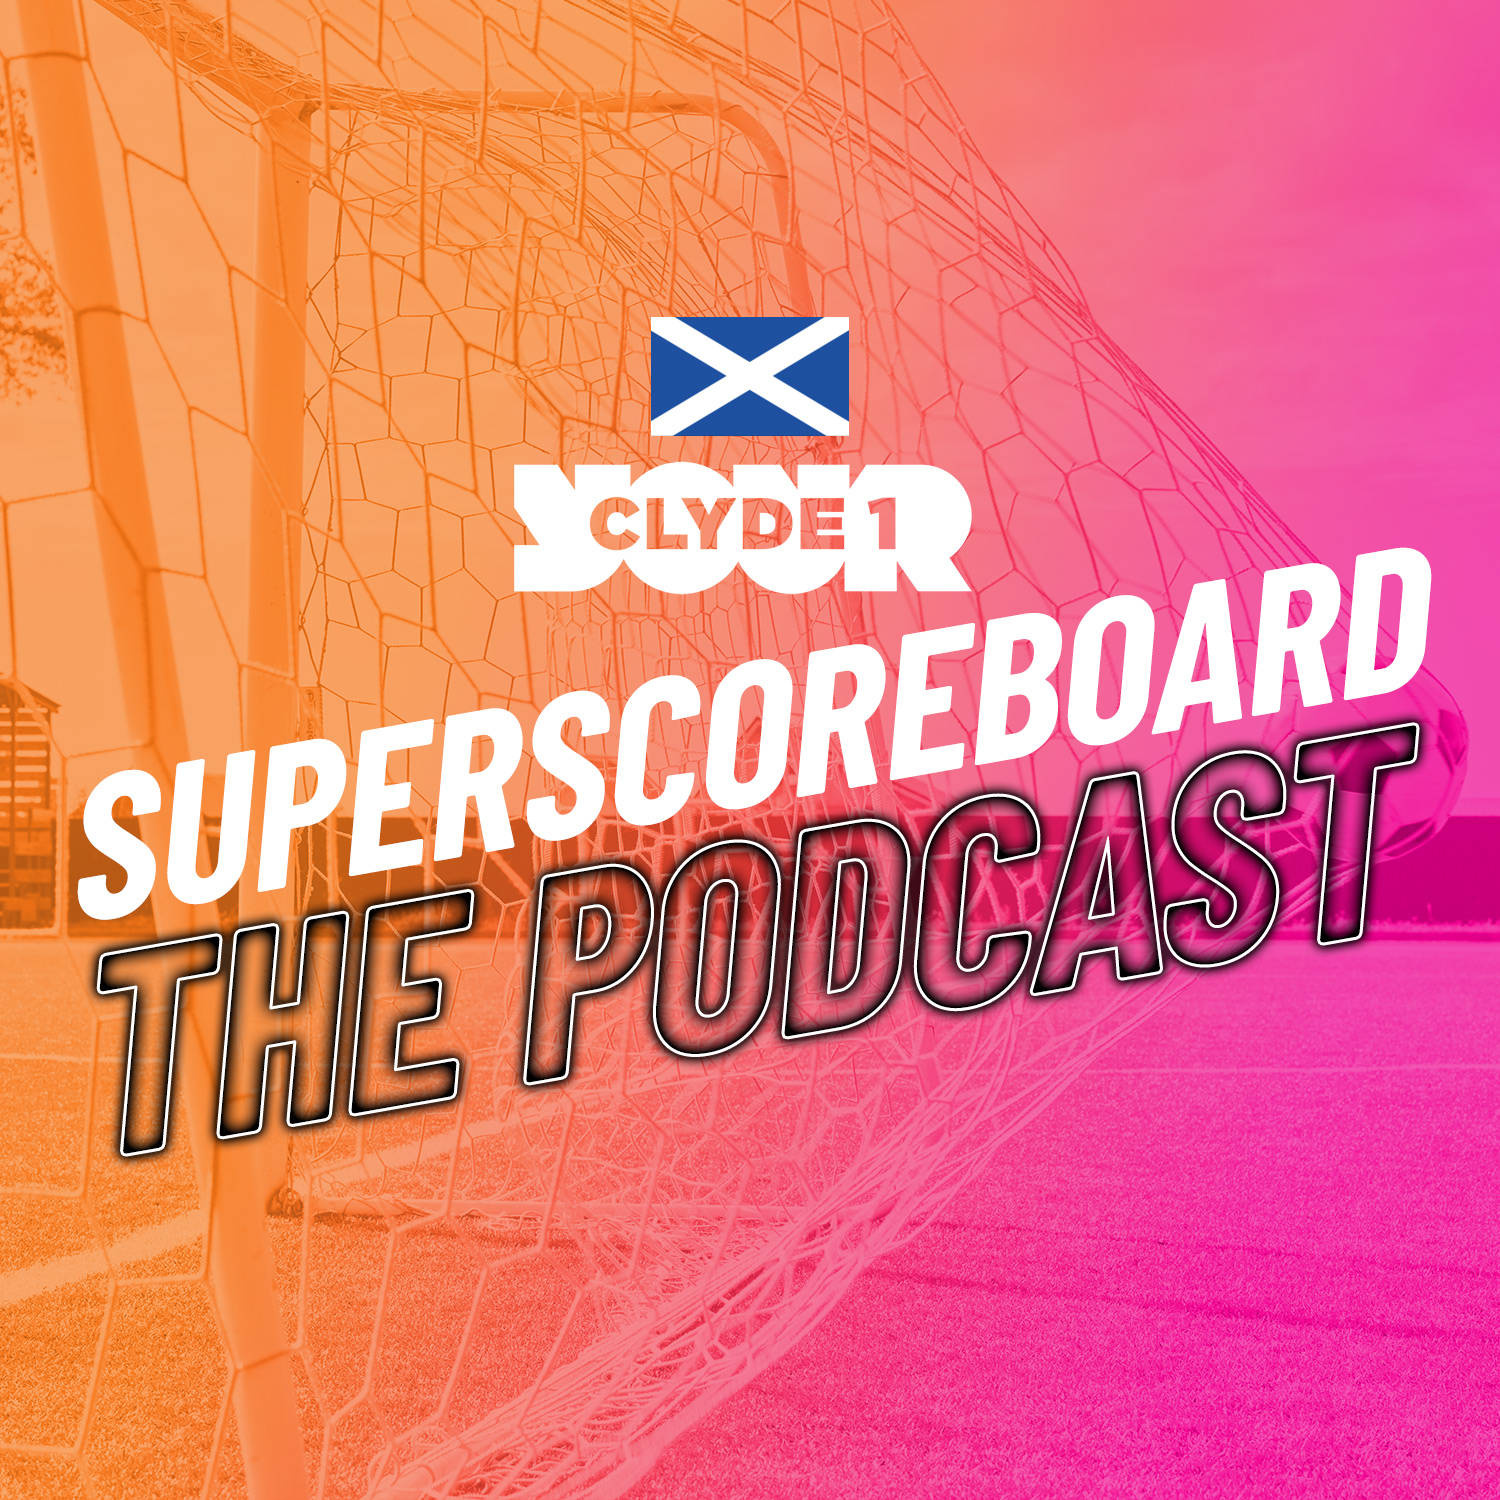 Wednesday 31st January Clyde 1 Superscoreboard